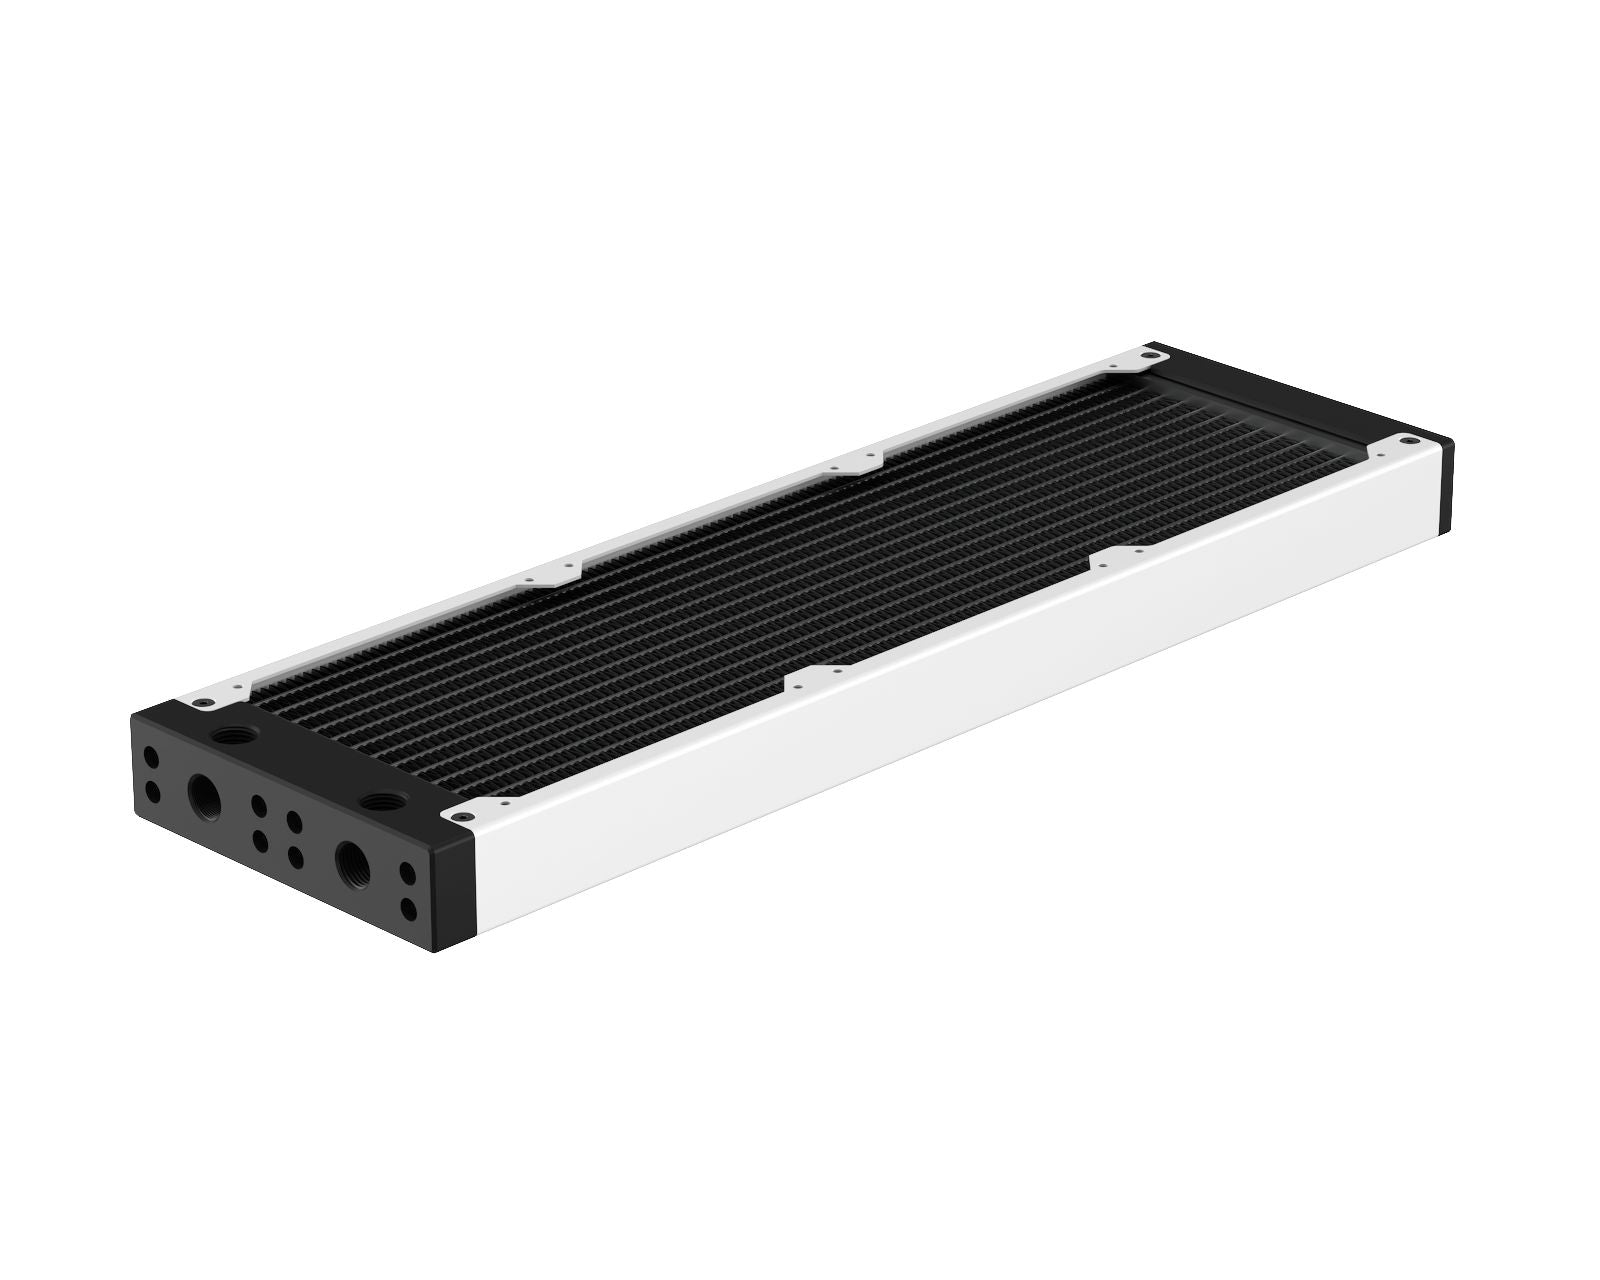 PrimoChill 360SL (30mm) EXIMO Modular Radiator, Black POM, 3x120mm, Triple Fan (R-SL-BK36) Available in 20+ Colors, Assembled in USA and Custom Watercooling Loop Ready - Sky White